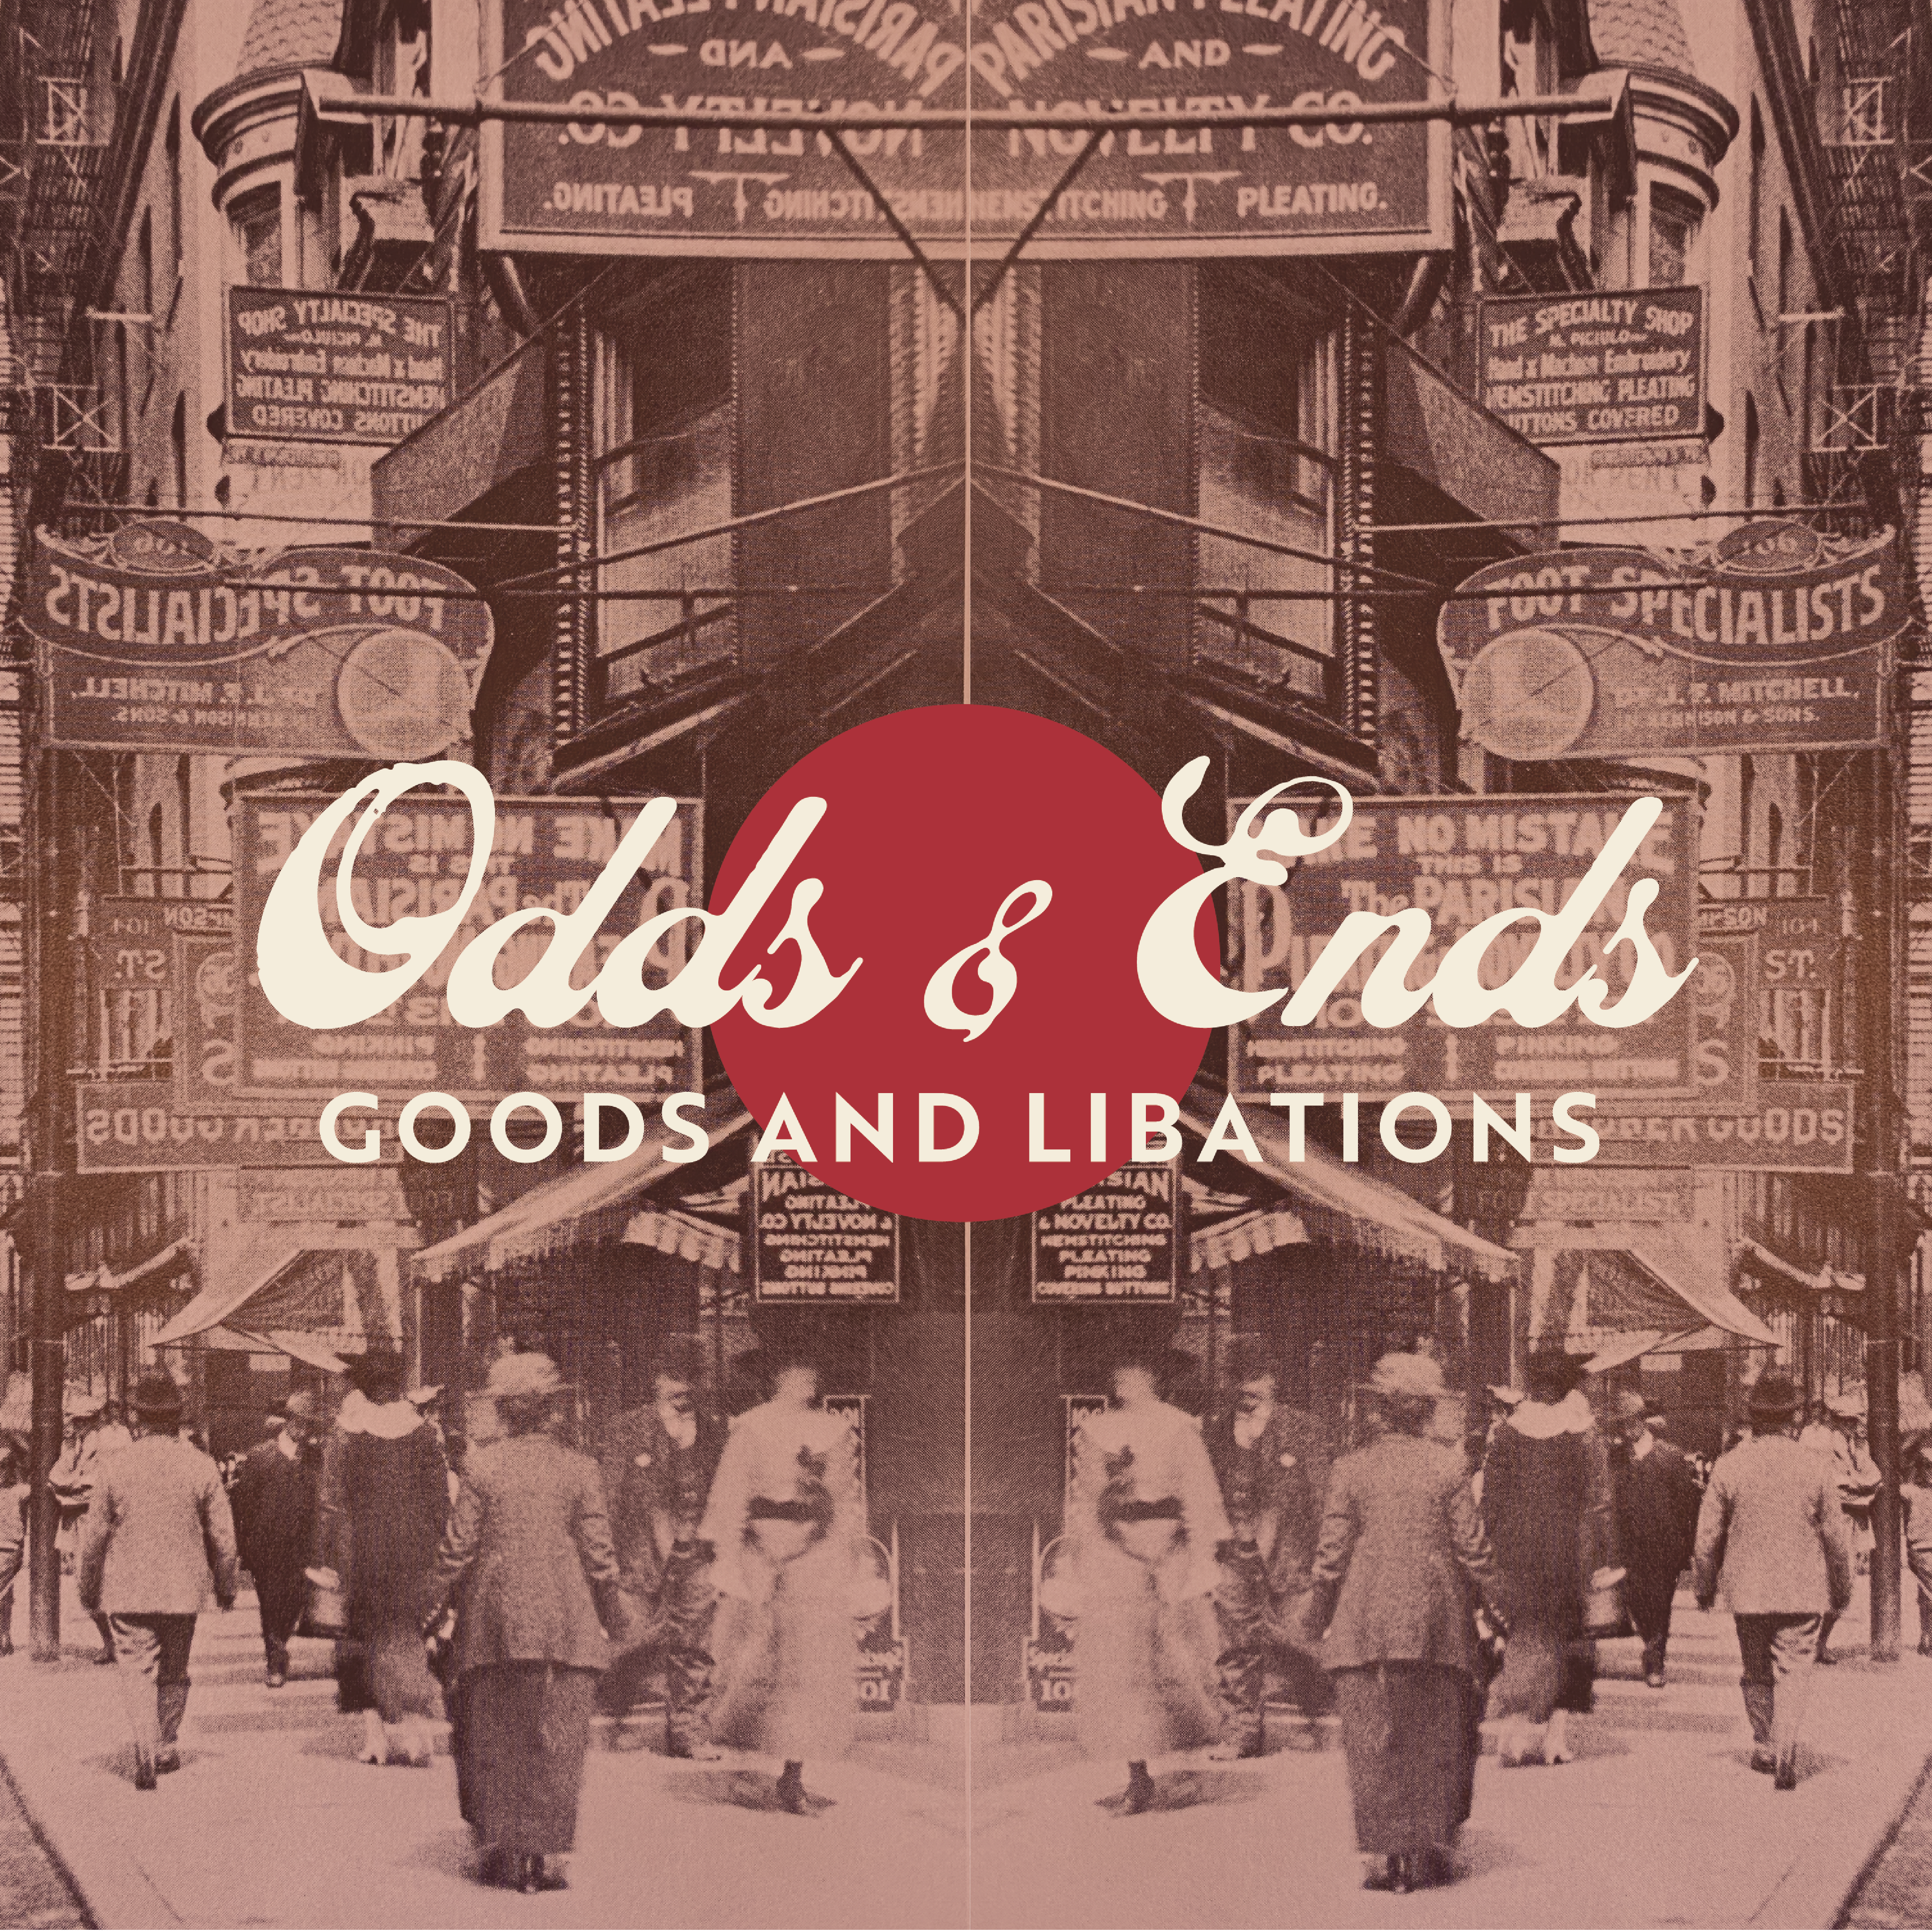 ODDS AND ENDS GOODS AND LIBATIONS